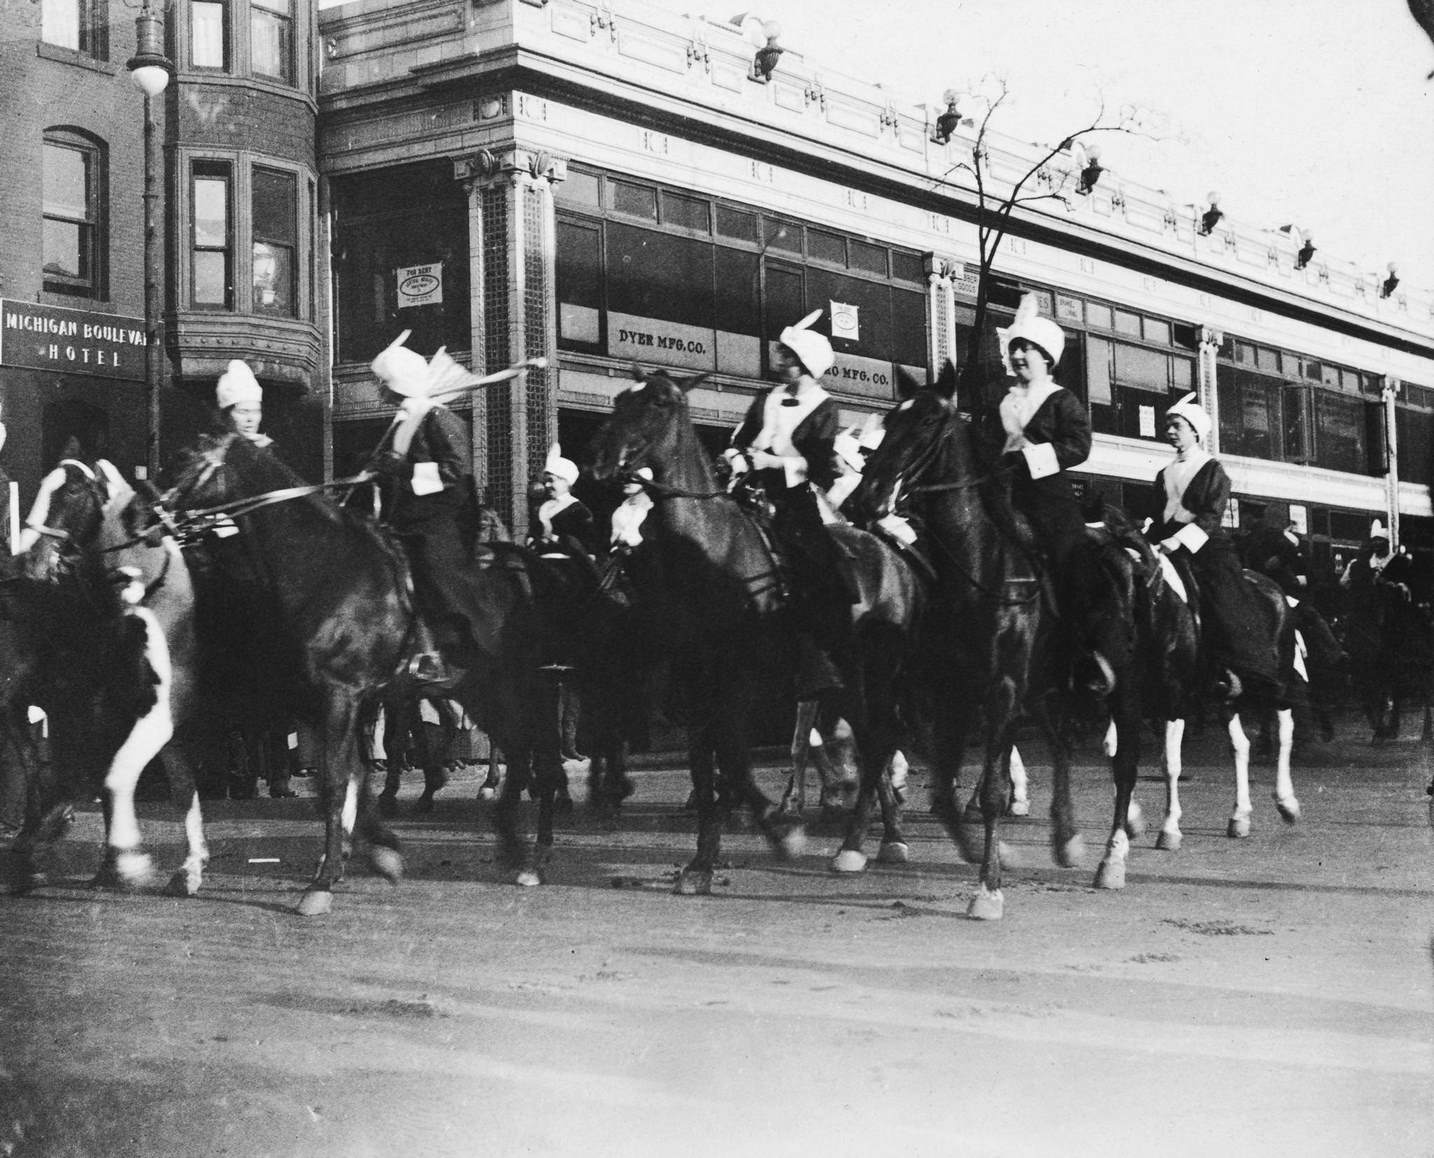 Suffragettes on horseback during a parade on Ingleside Ave, Chicago, 1915.